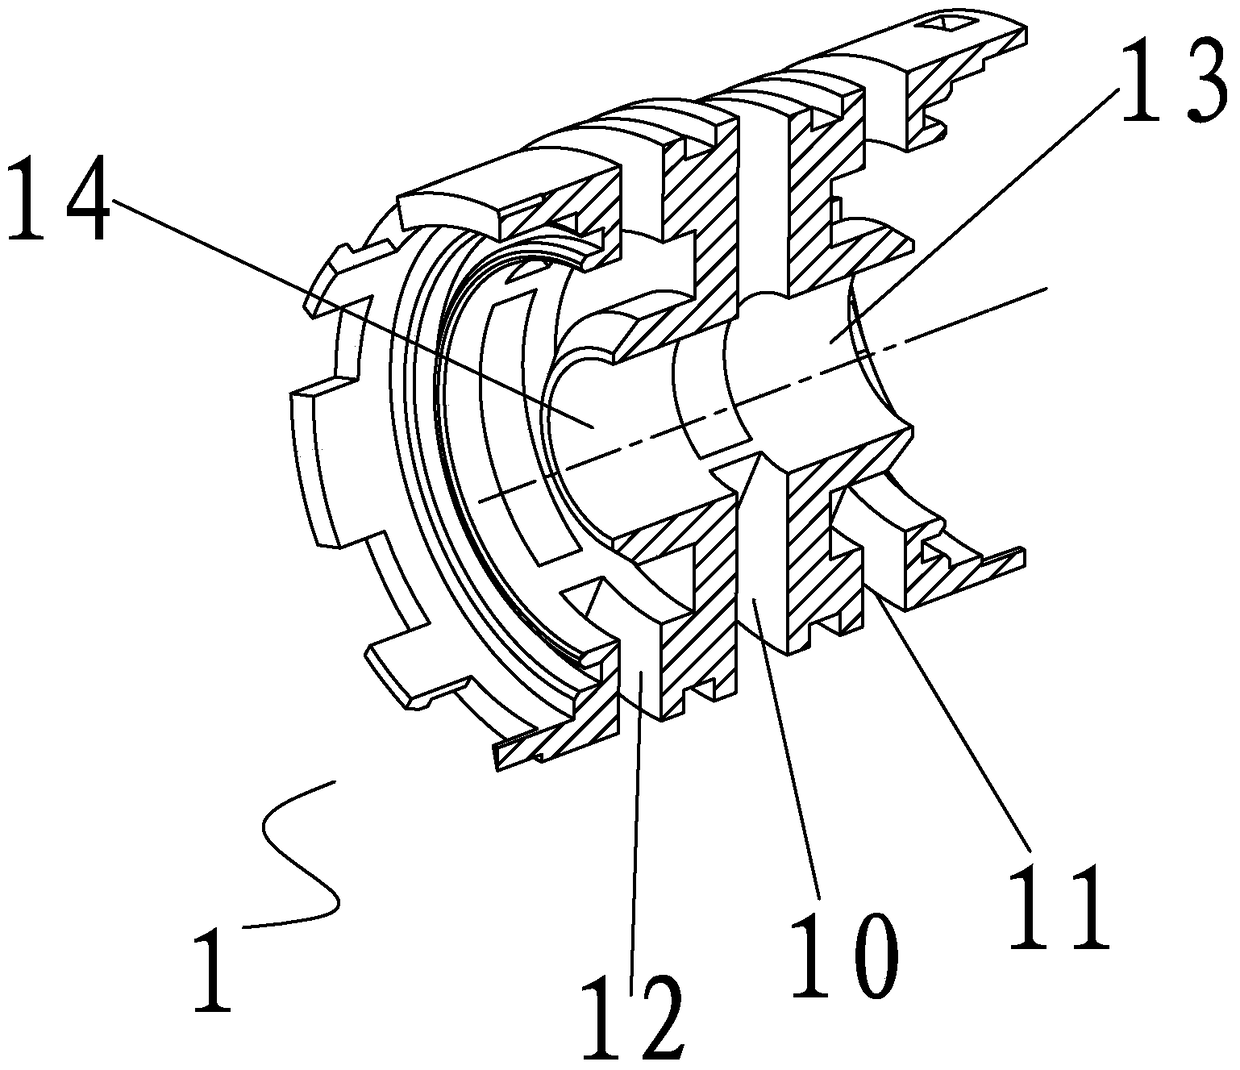 A connecting rod inter-sealing water separation structure